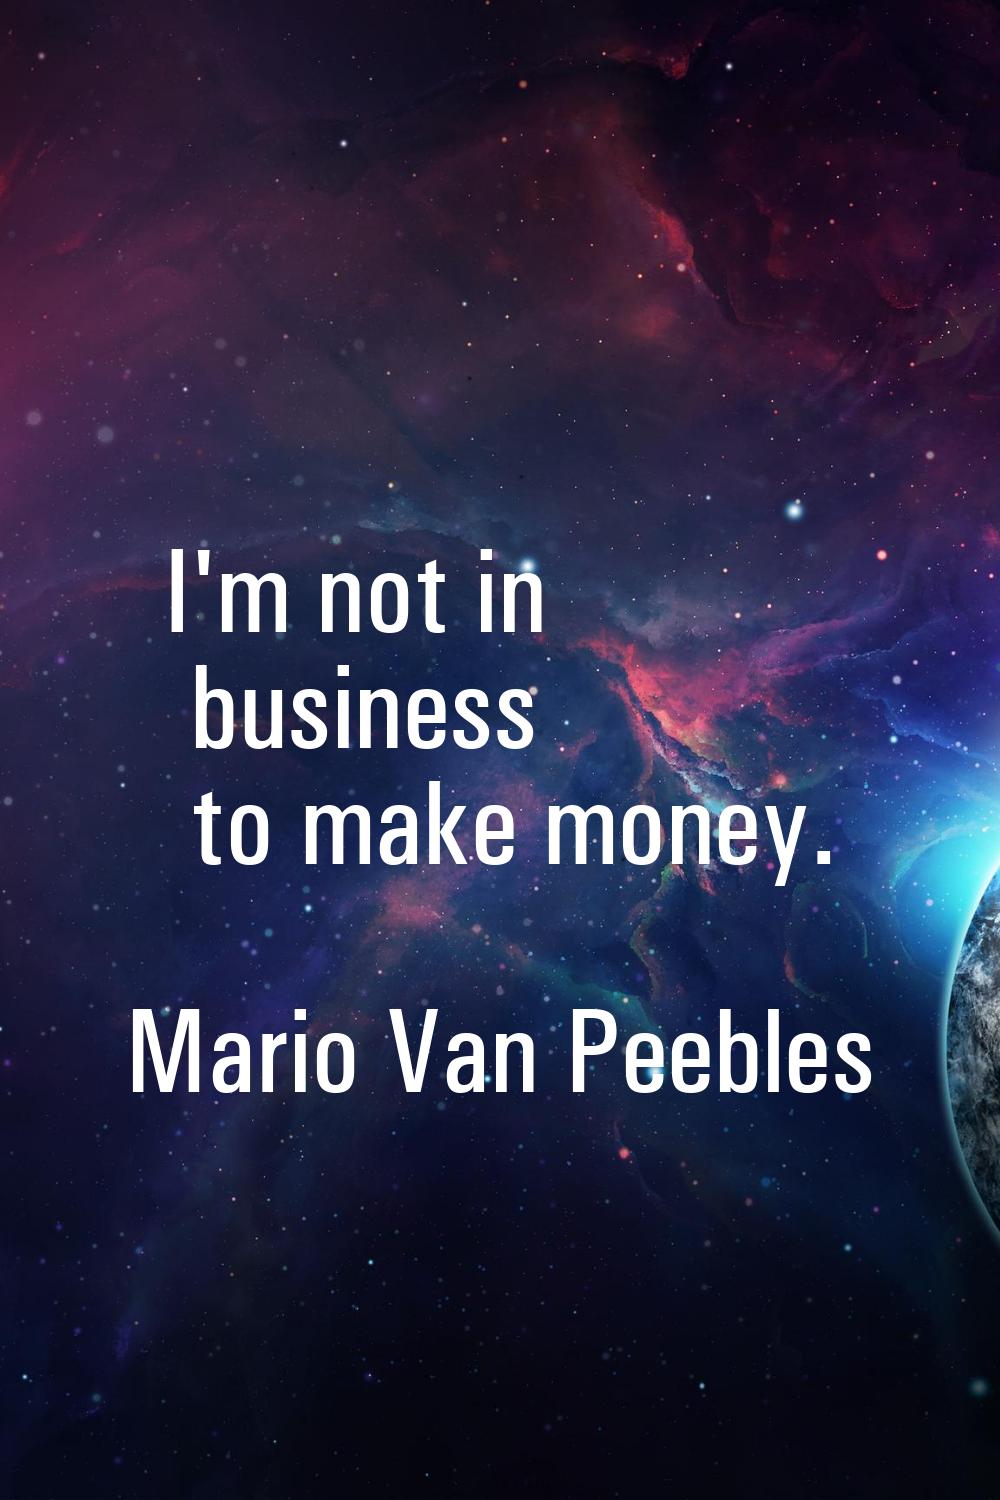 I'm not in business to make money.